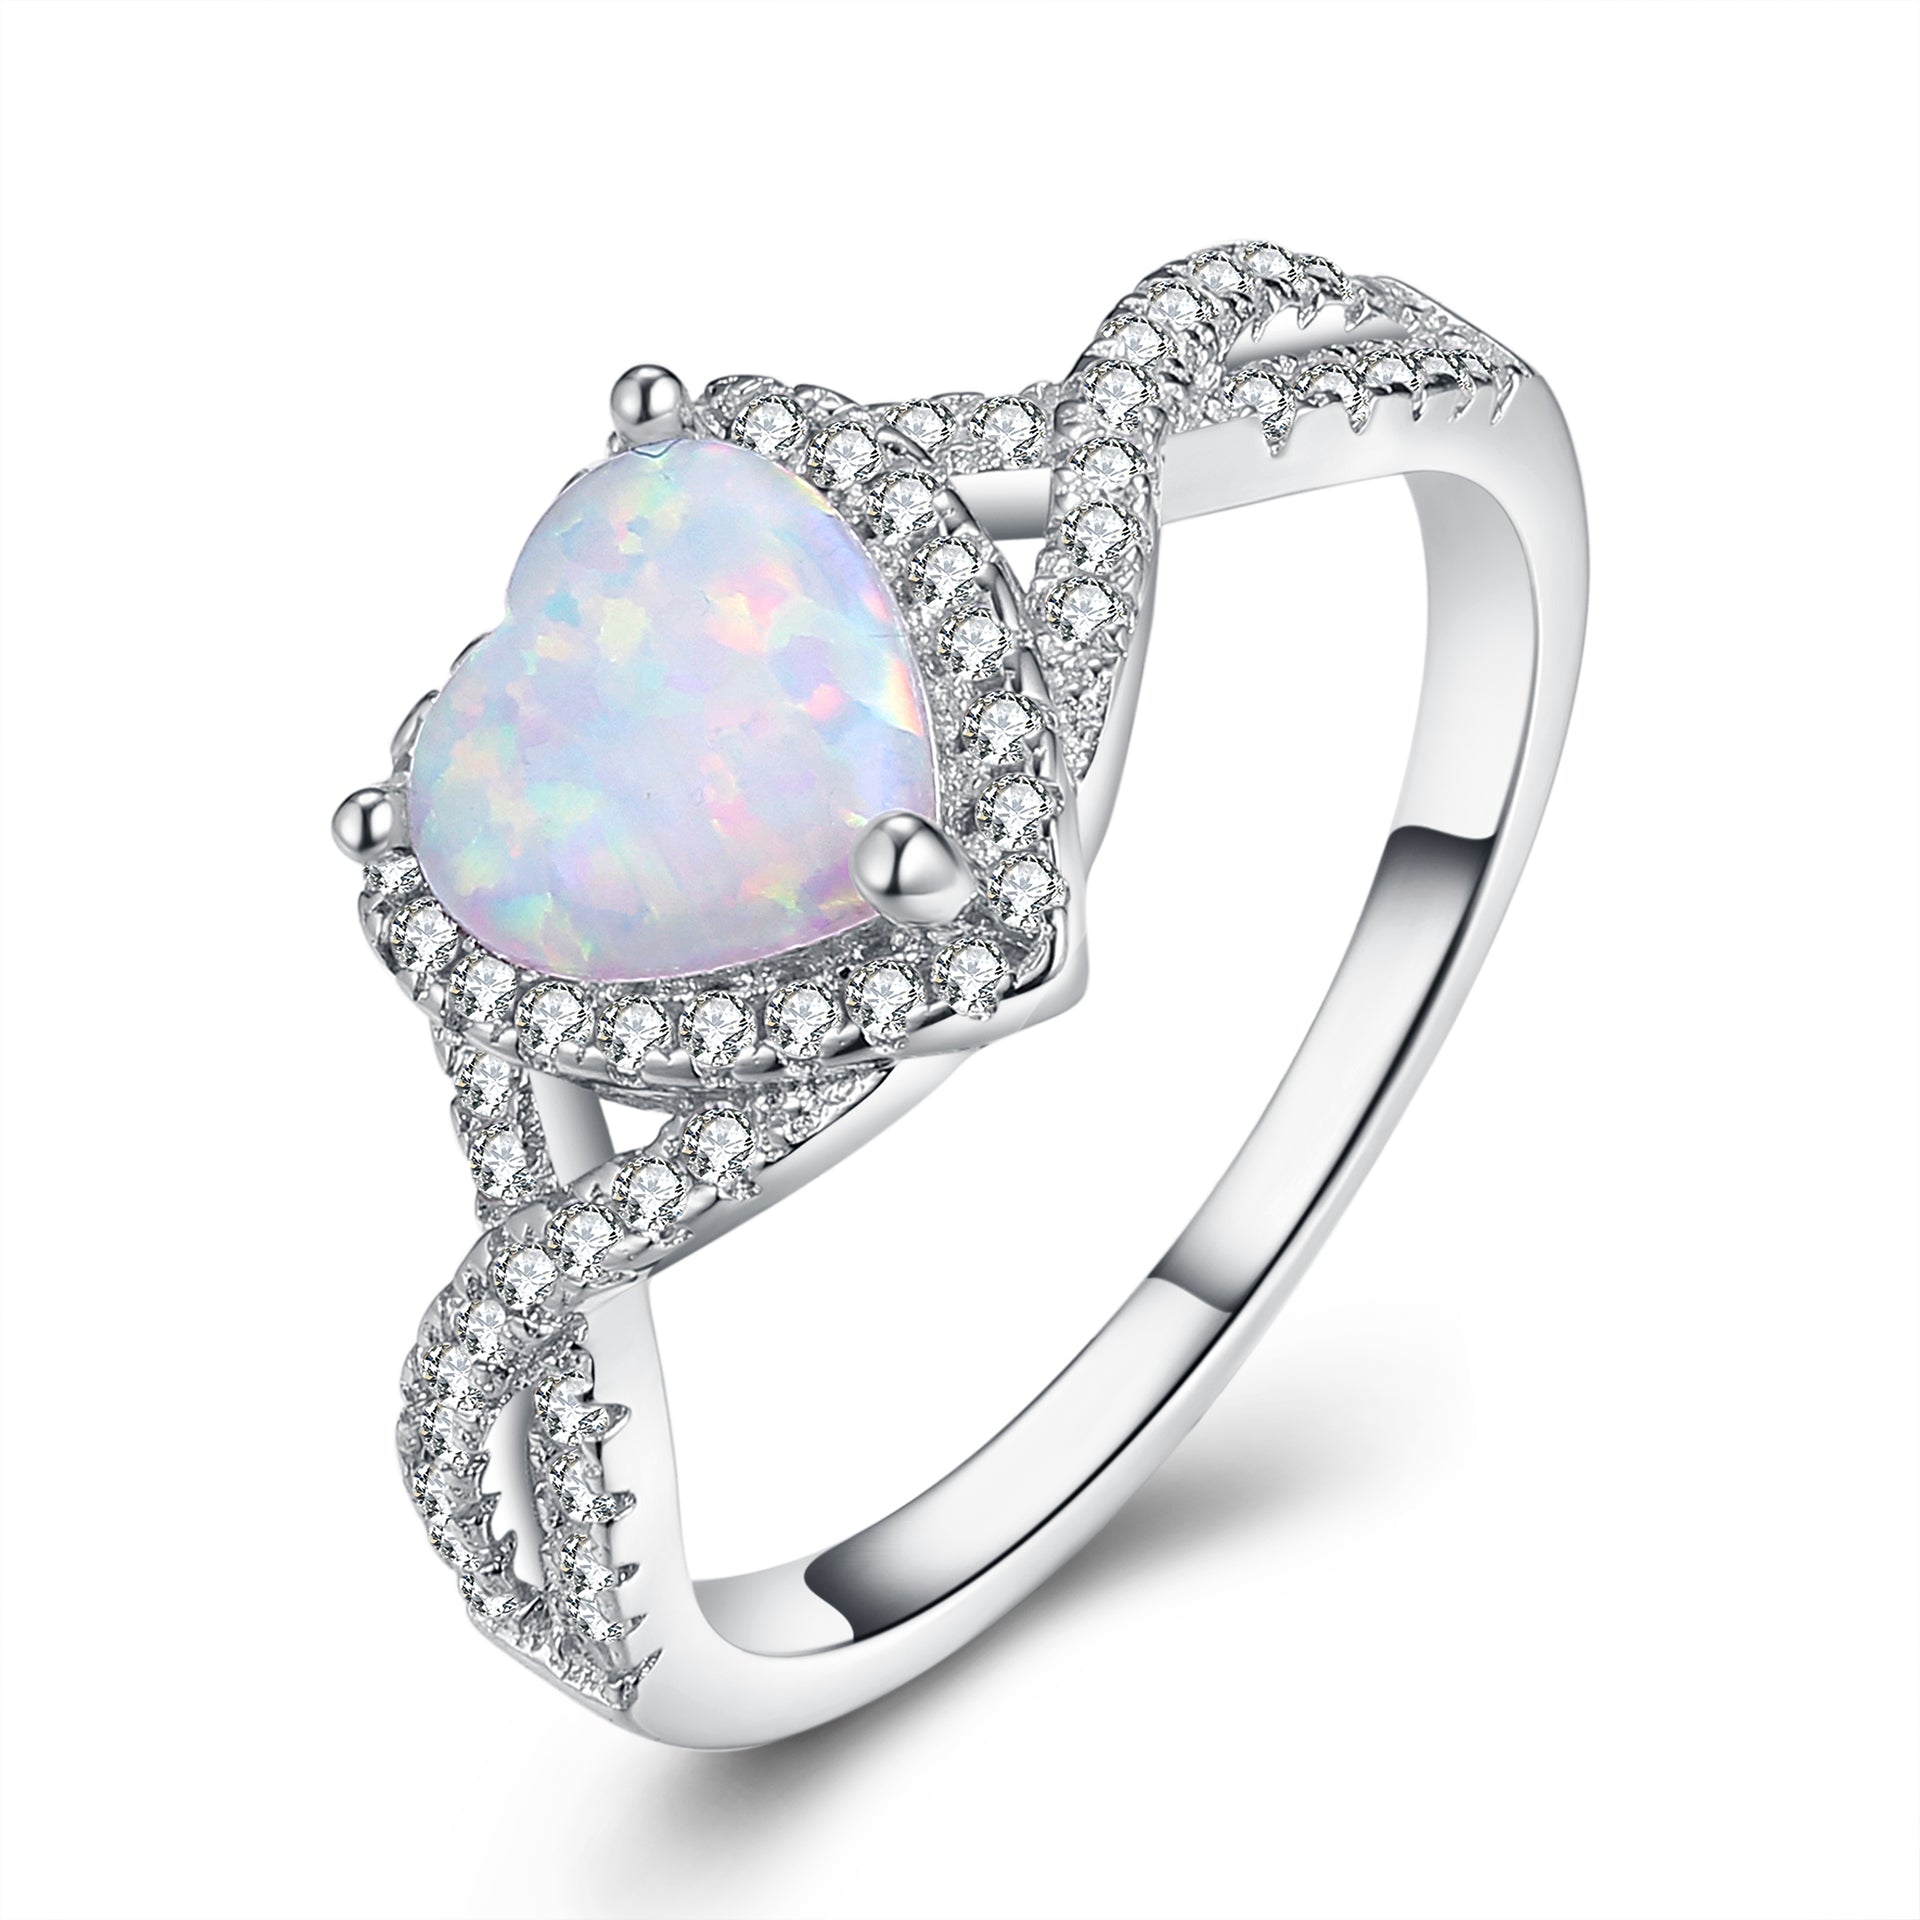 Finger Rhodium Plated Jewelry Zirconia And Opal 925 Silver Latest Ring Designs For Girls